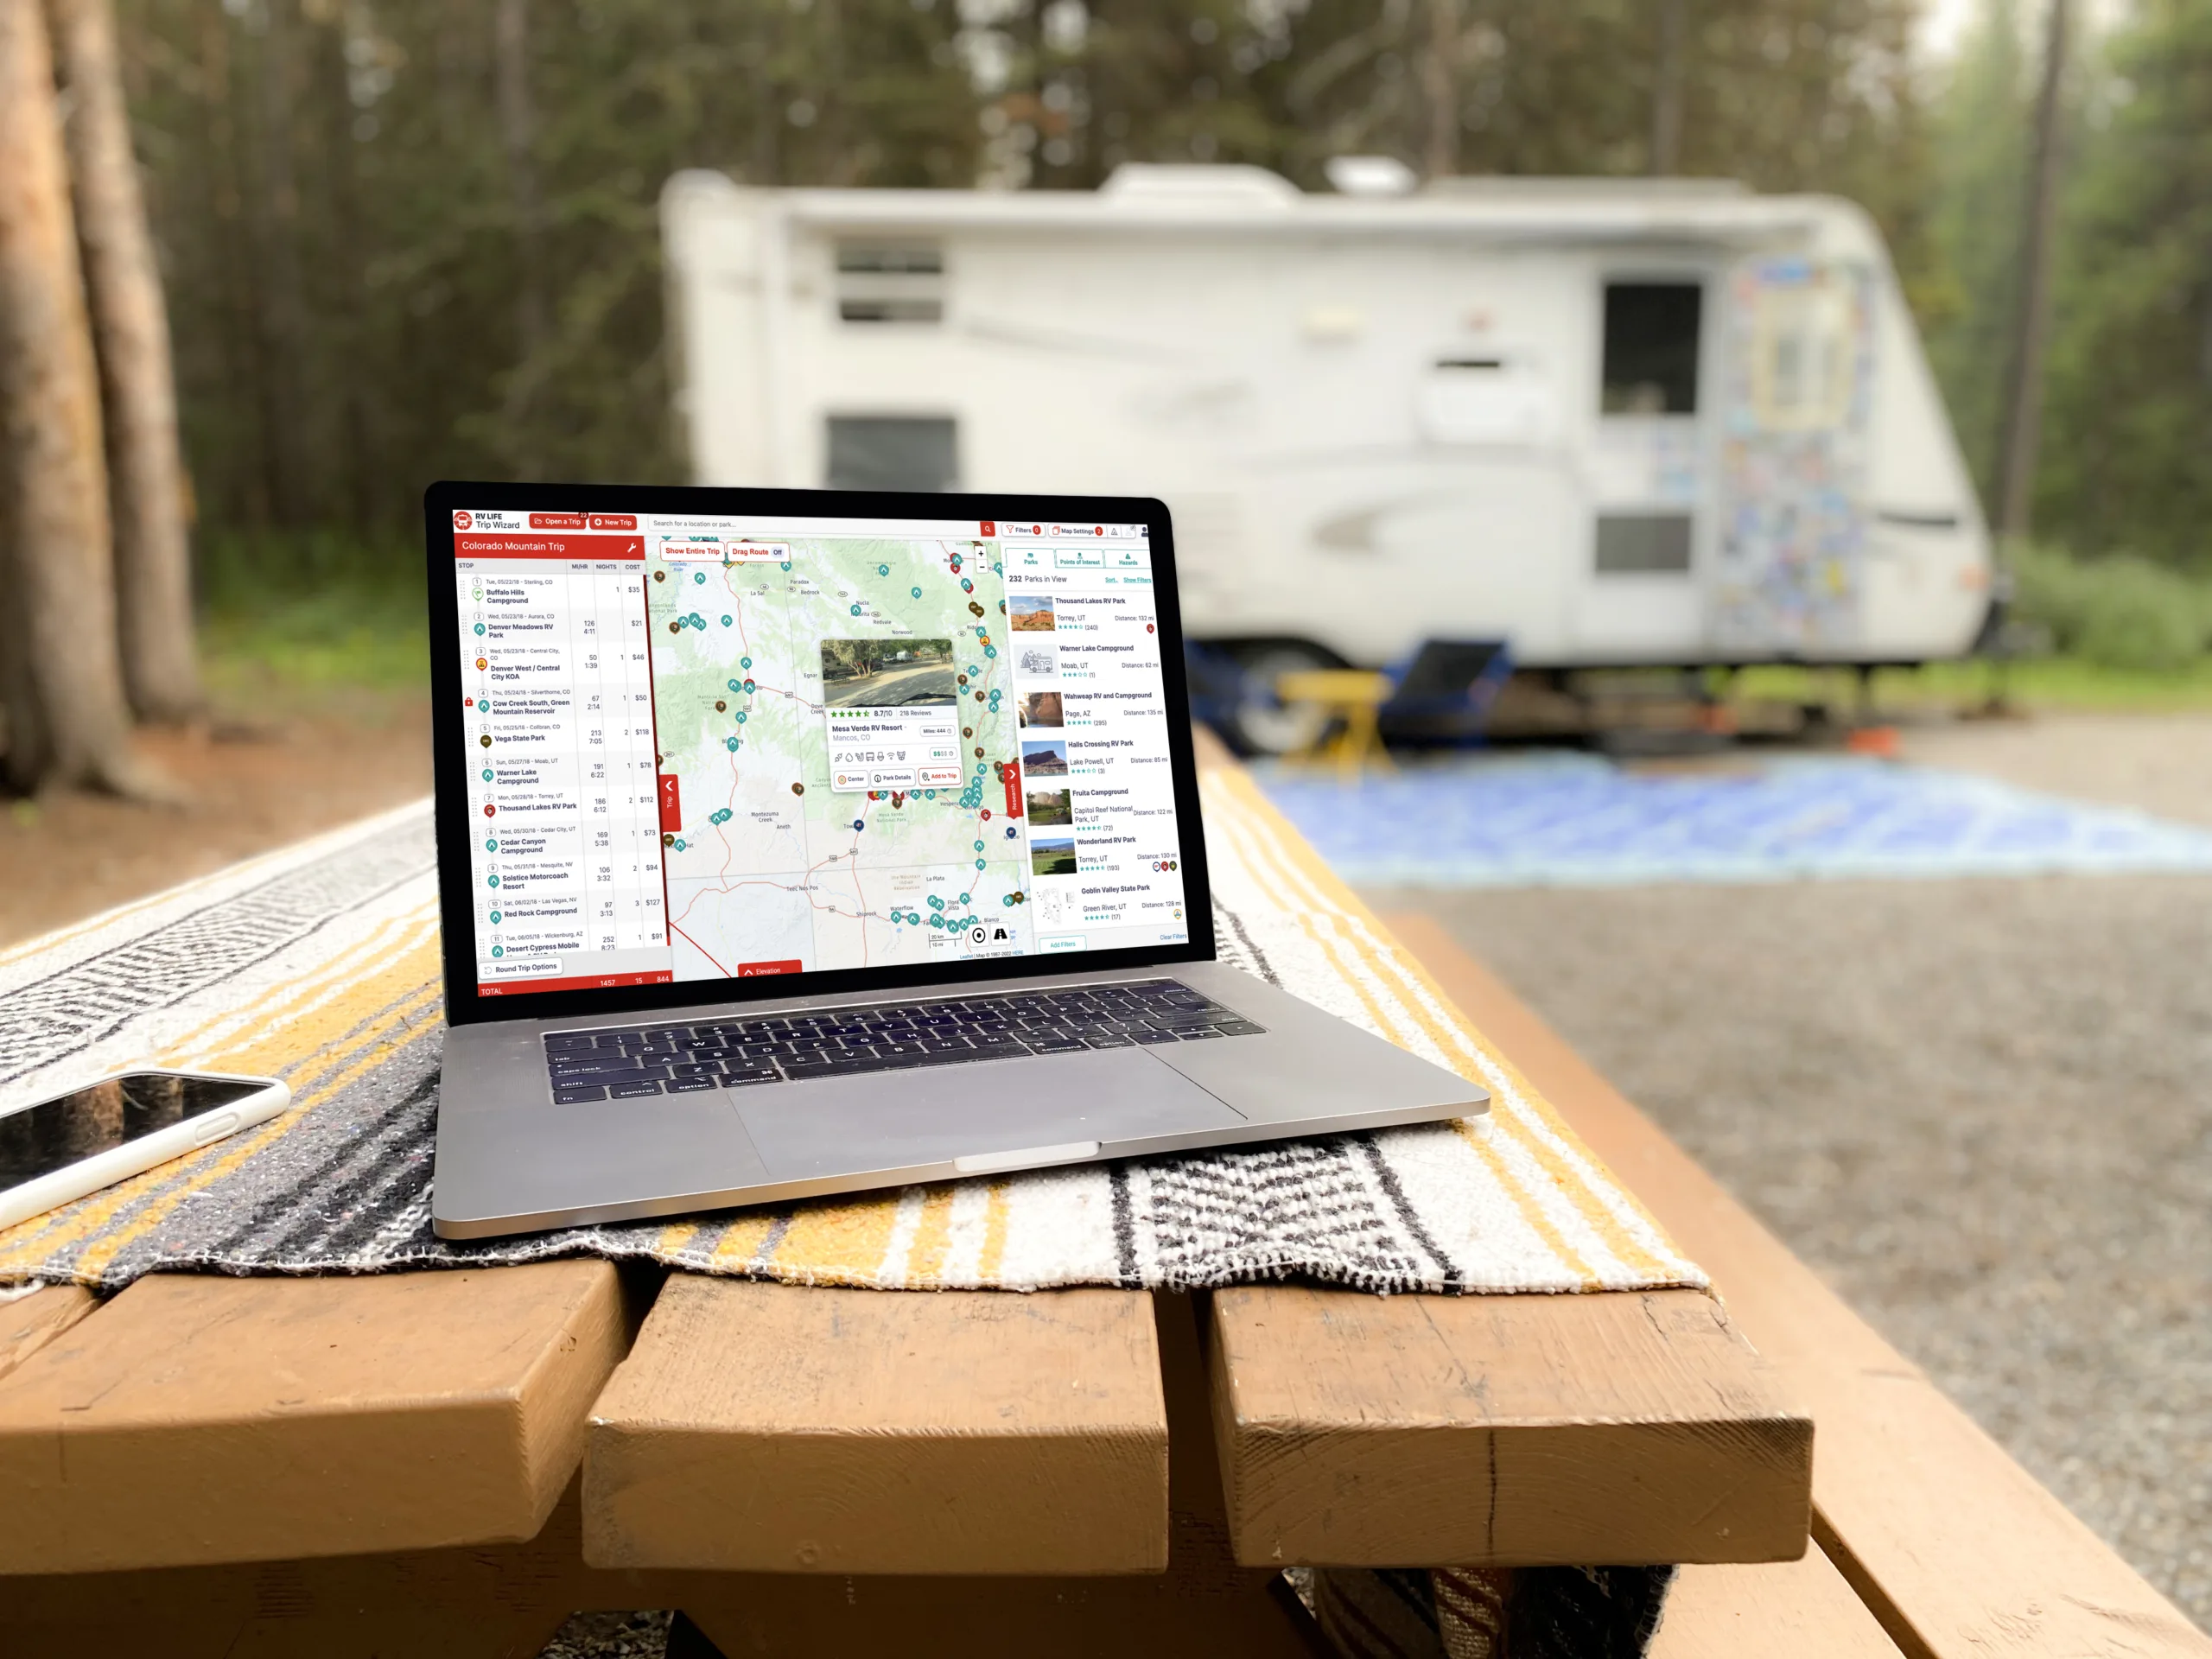 free internet on laptop, in front of RV